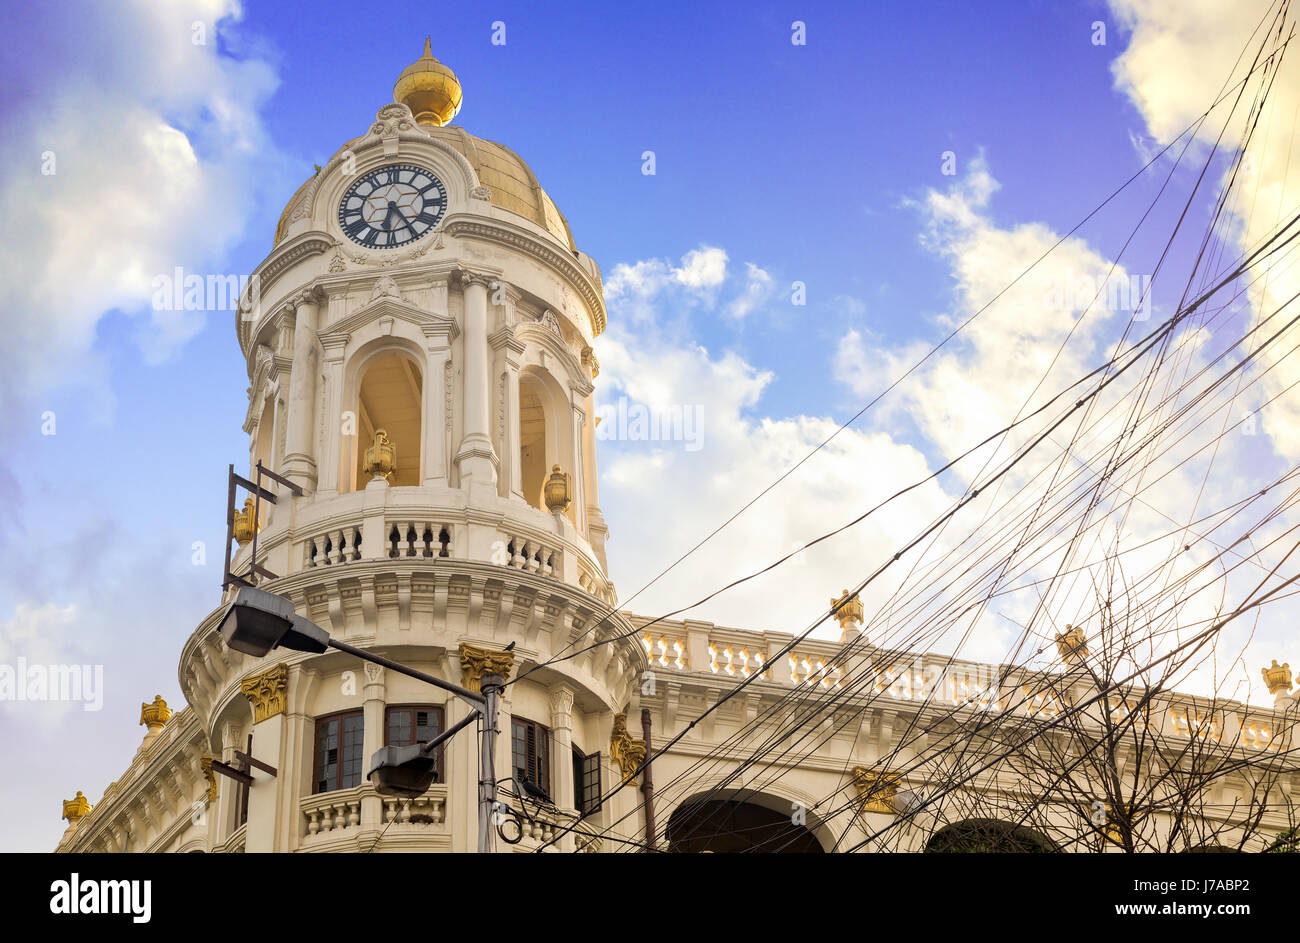 Vintage colonial architecture building dome and clock tower with a moody sunset sky. Photograph of vintage Metropolitan building at Kolkata, India. Stock Photo